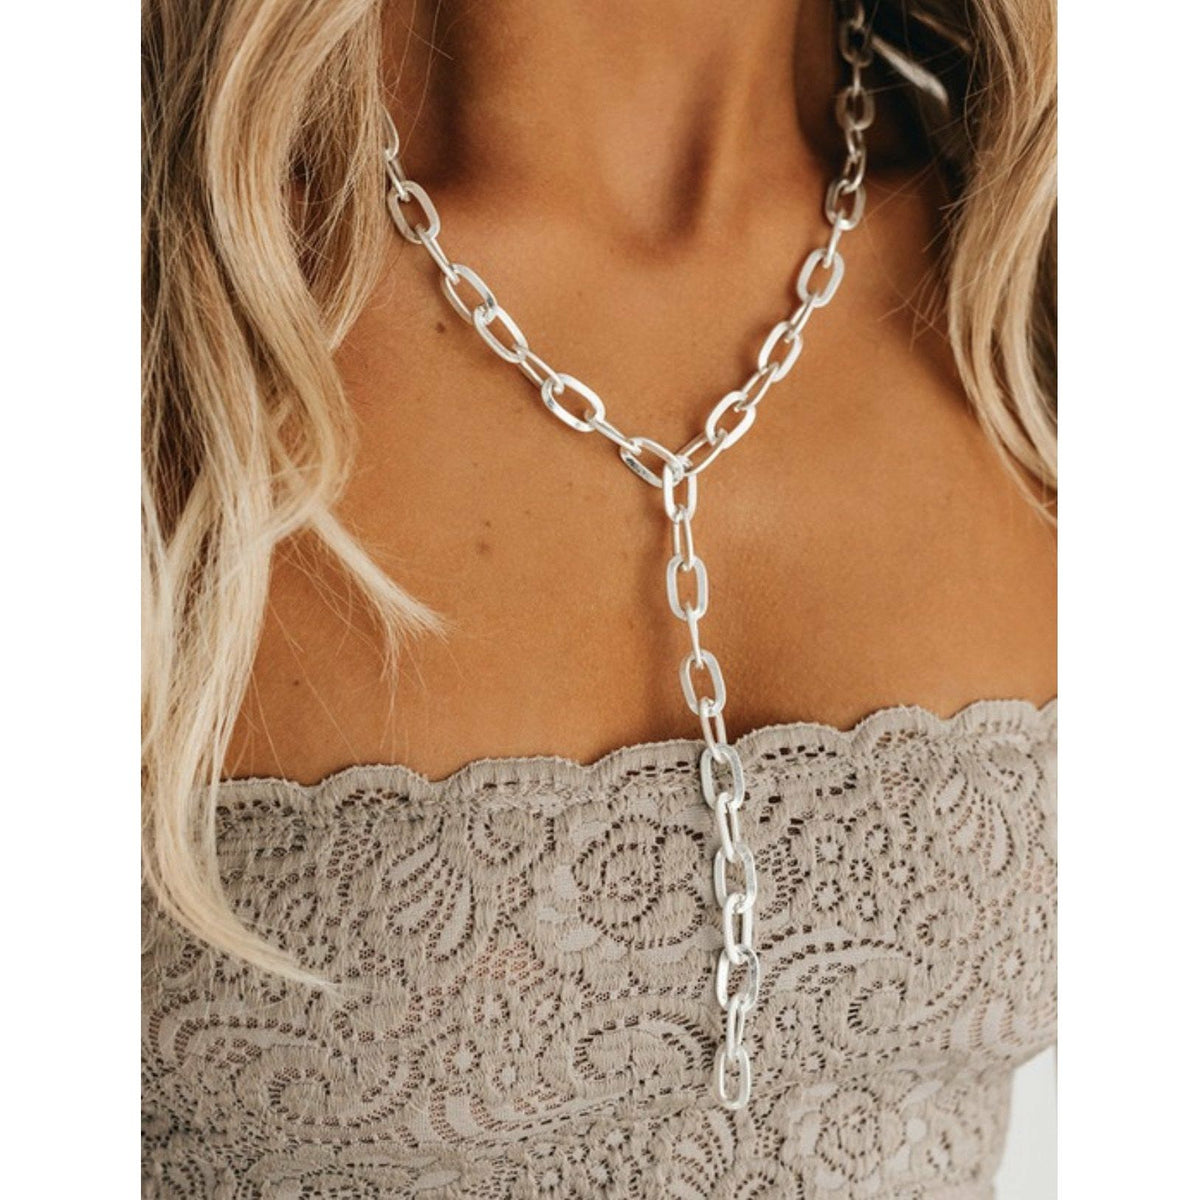 Chain Lariat Boho Necklace-Necklaces-[Womens_Boutique]-[NFR]-[Rodeo_Fashion]-[Western_Style]-Calamity's LLC